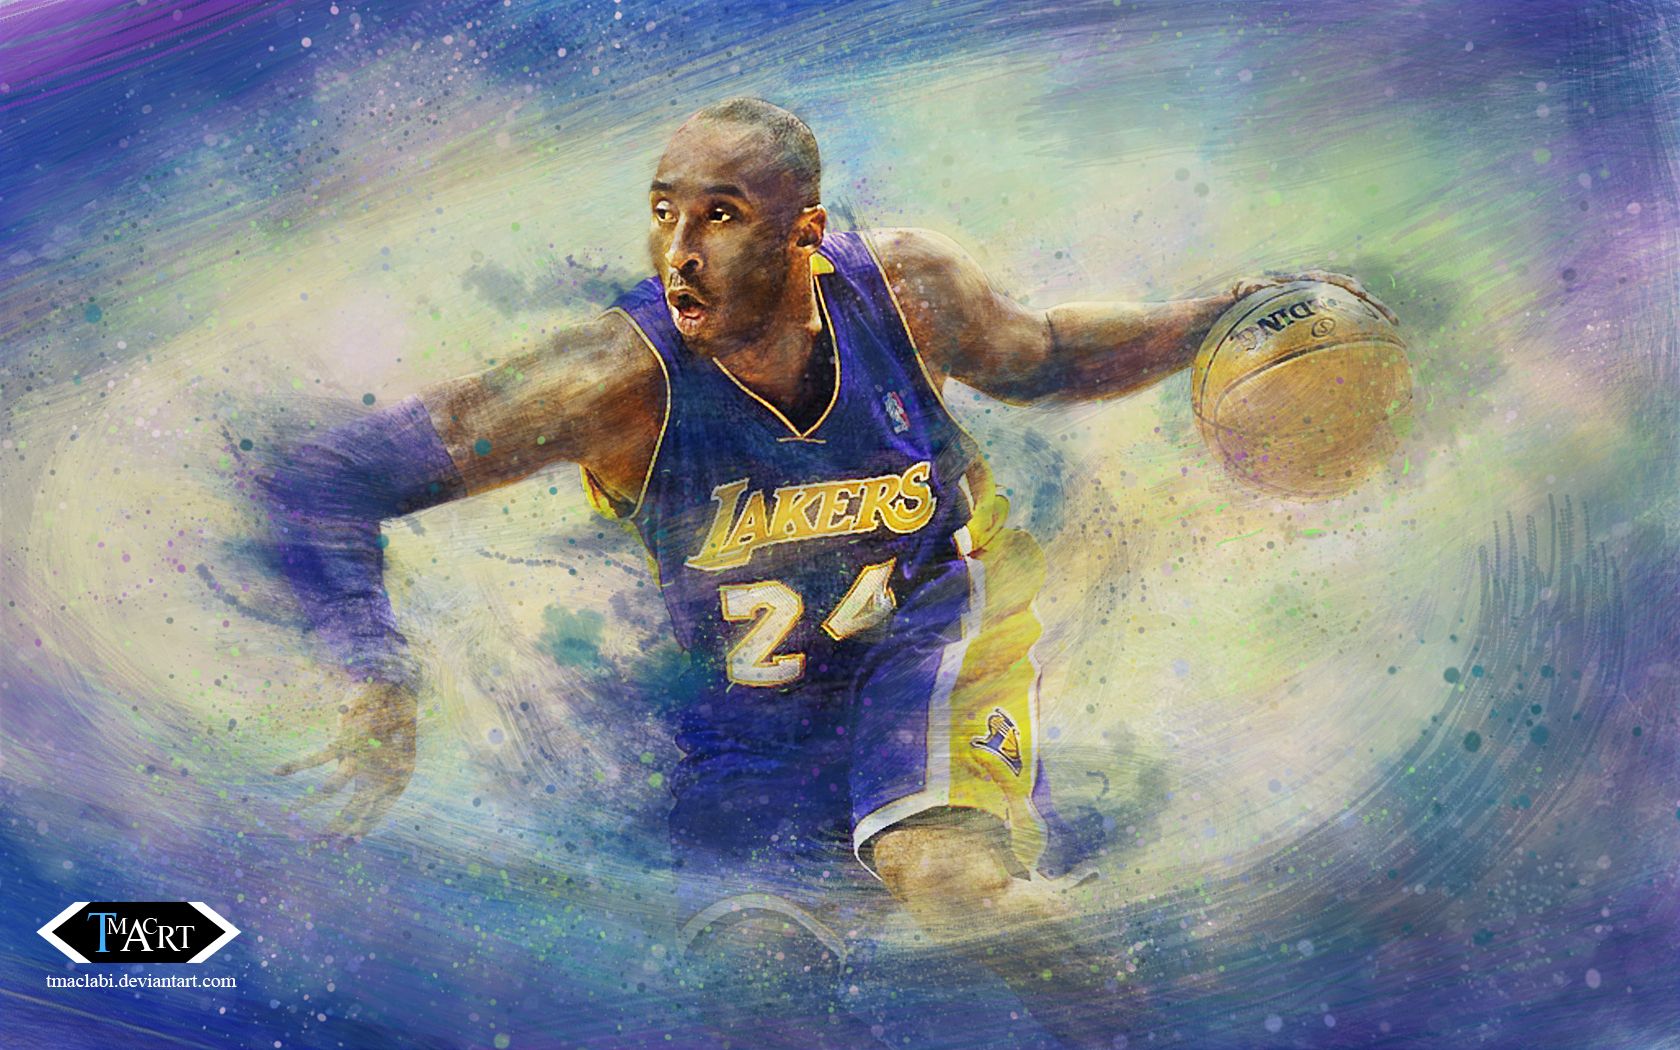 Free download Kobe Bryant Written in the Stars Wallpaper by tmaclabi [1680x1050] for your Desktop, Mobile & Tablet. Explore Kobe Bryant Wallpaper 2014. Kobe Bryant Wallpaper HD, Lakers Screensaver Desktop Wallpaper